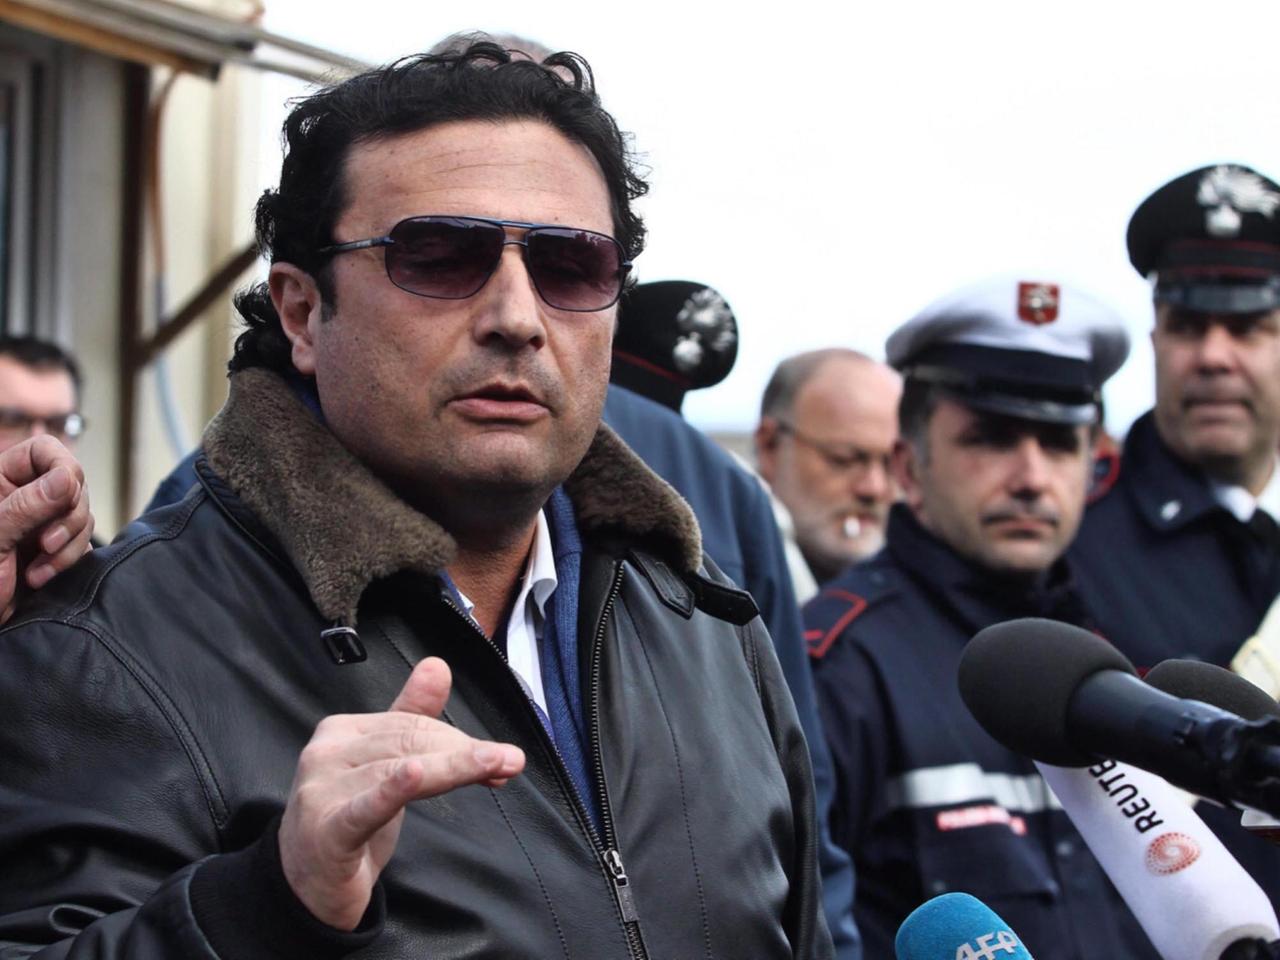 Former captain of the wrecked cruise ship "Costa Concordia" Speaking to reporters in Kiglio.